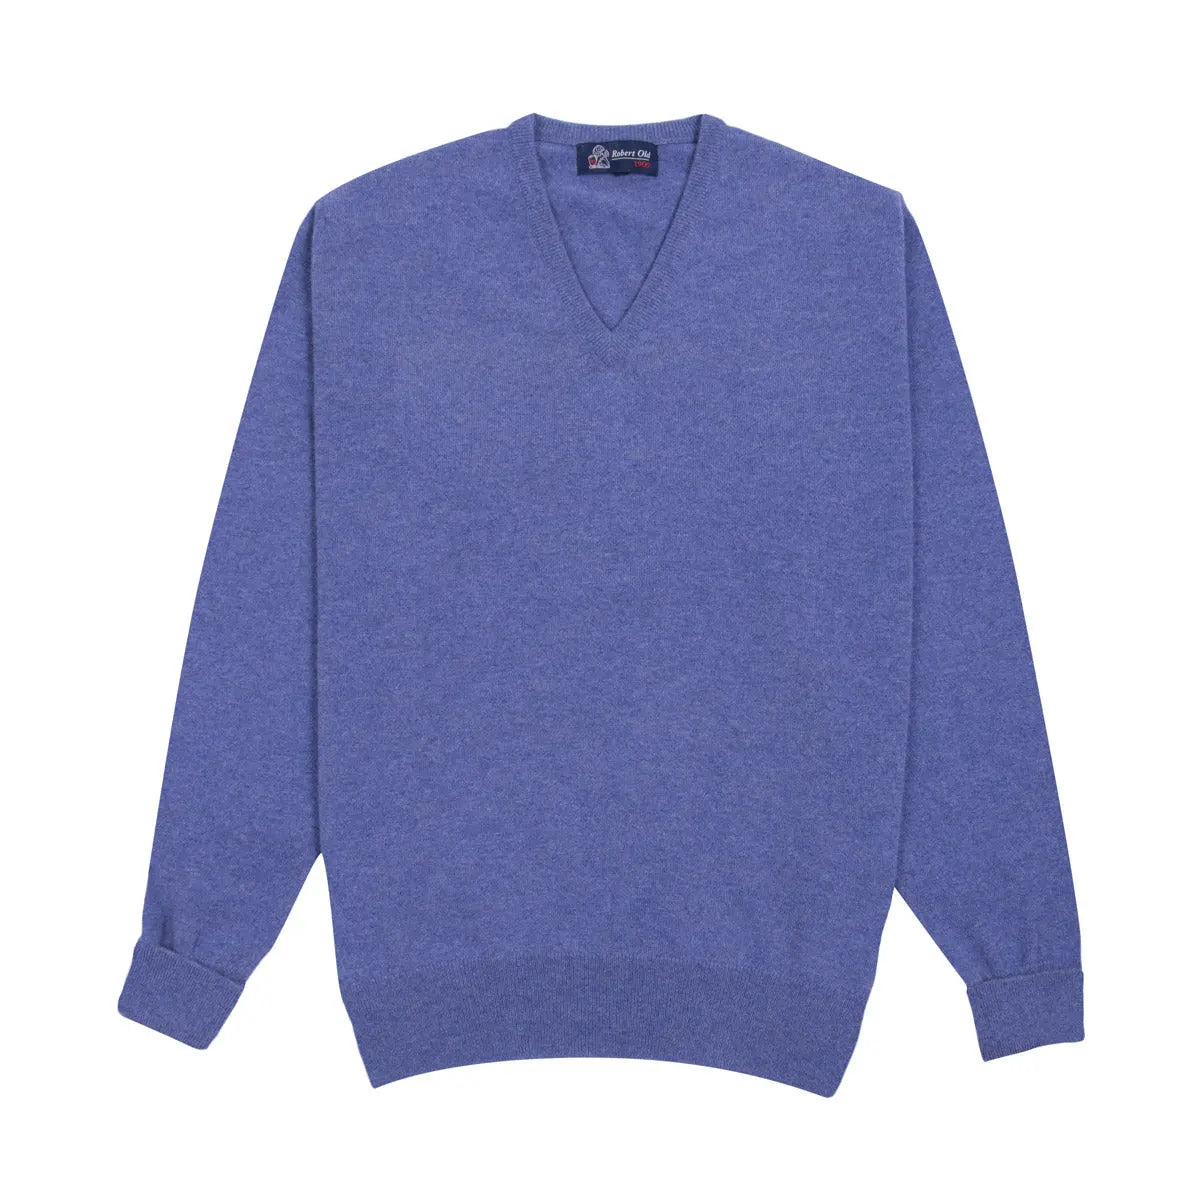 Lapis Blue Chatsworth 2ply V-Neck Cashmere Sweater Robert Old